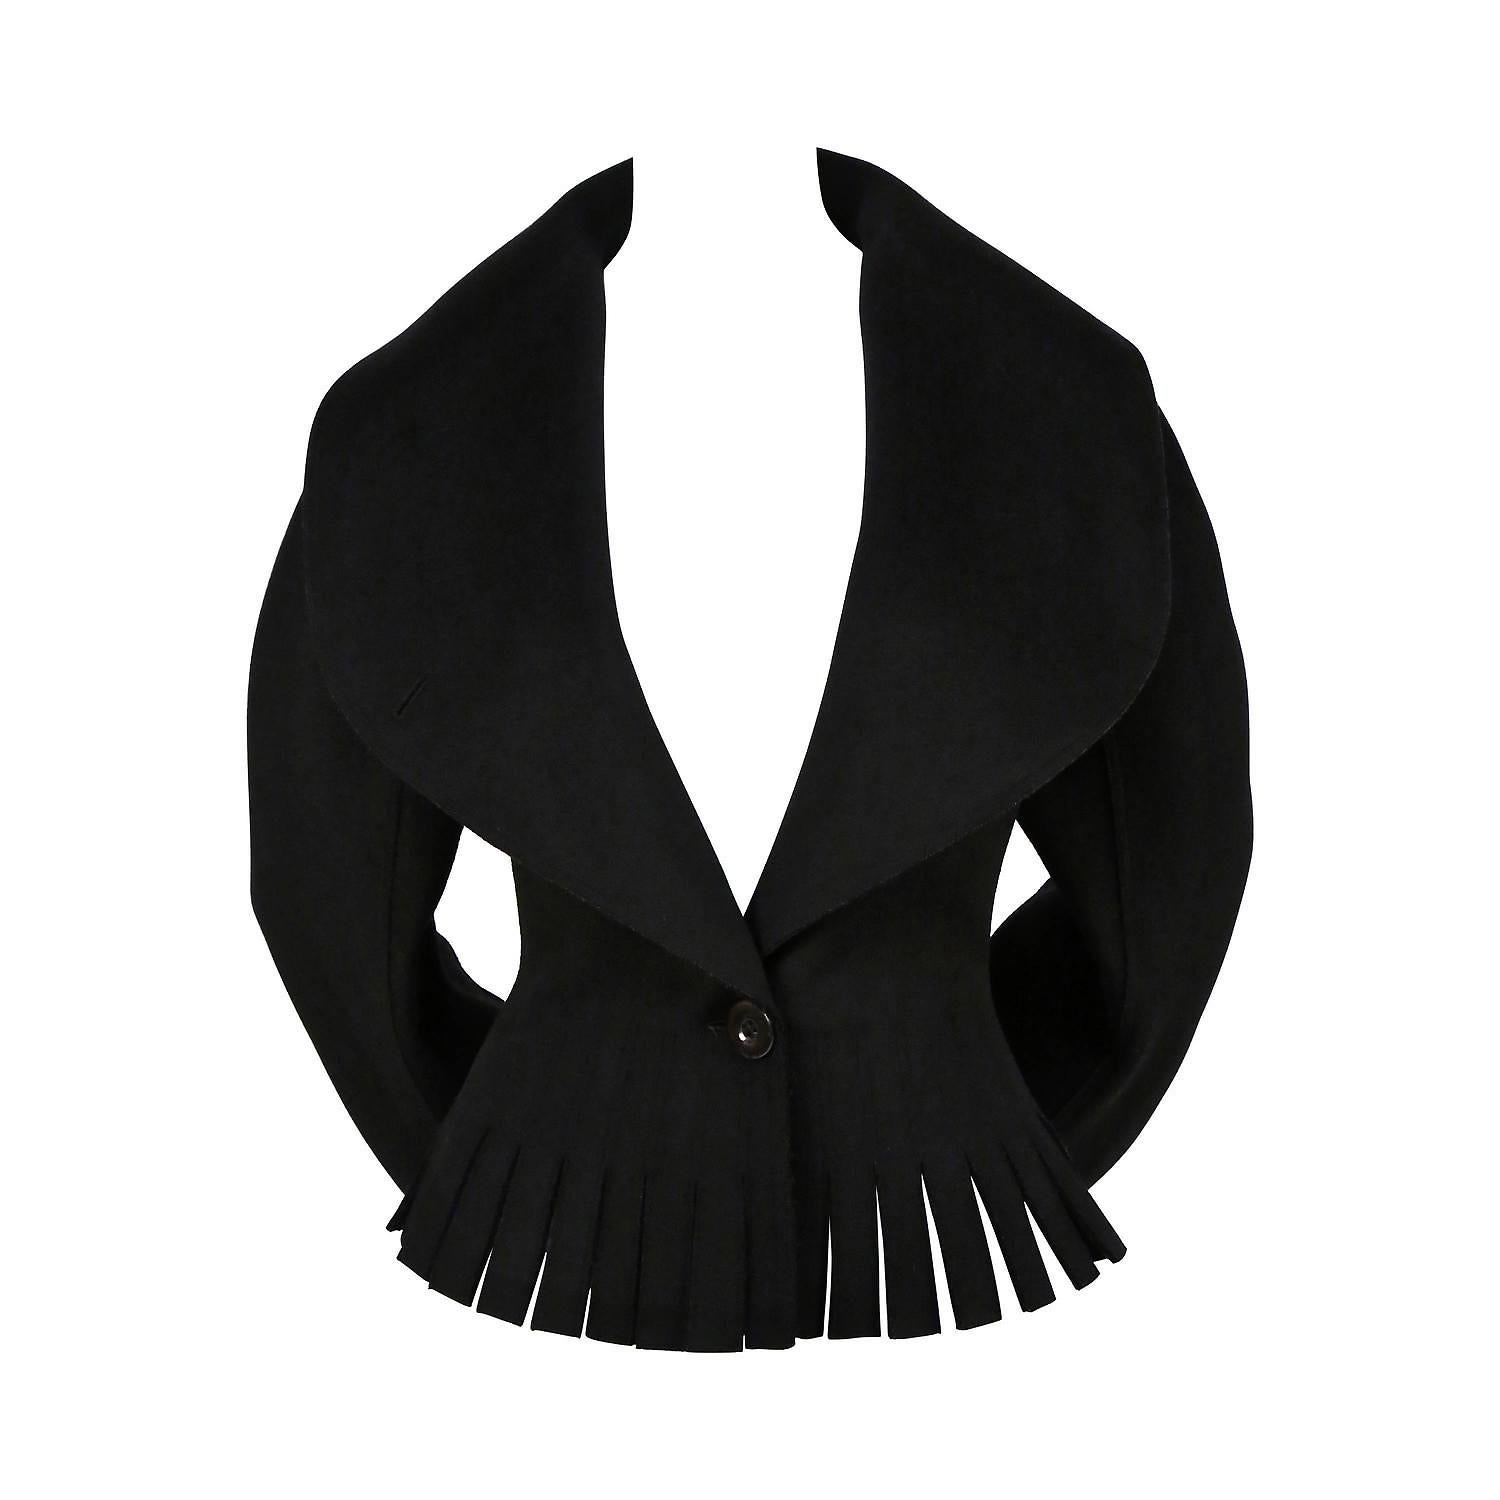 Gorgeous Azzedine Alaia jet-black wool jacket dating back to his 1990 collection. In the 1980's, when most of the fashion world was embracing sharp shouldered power dressing and baggy androgyny, Alaïa introduced the world to the 'body' and to his